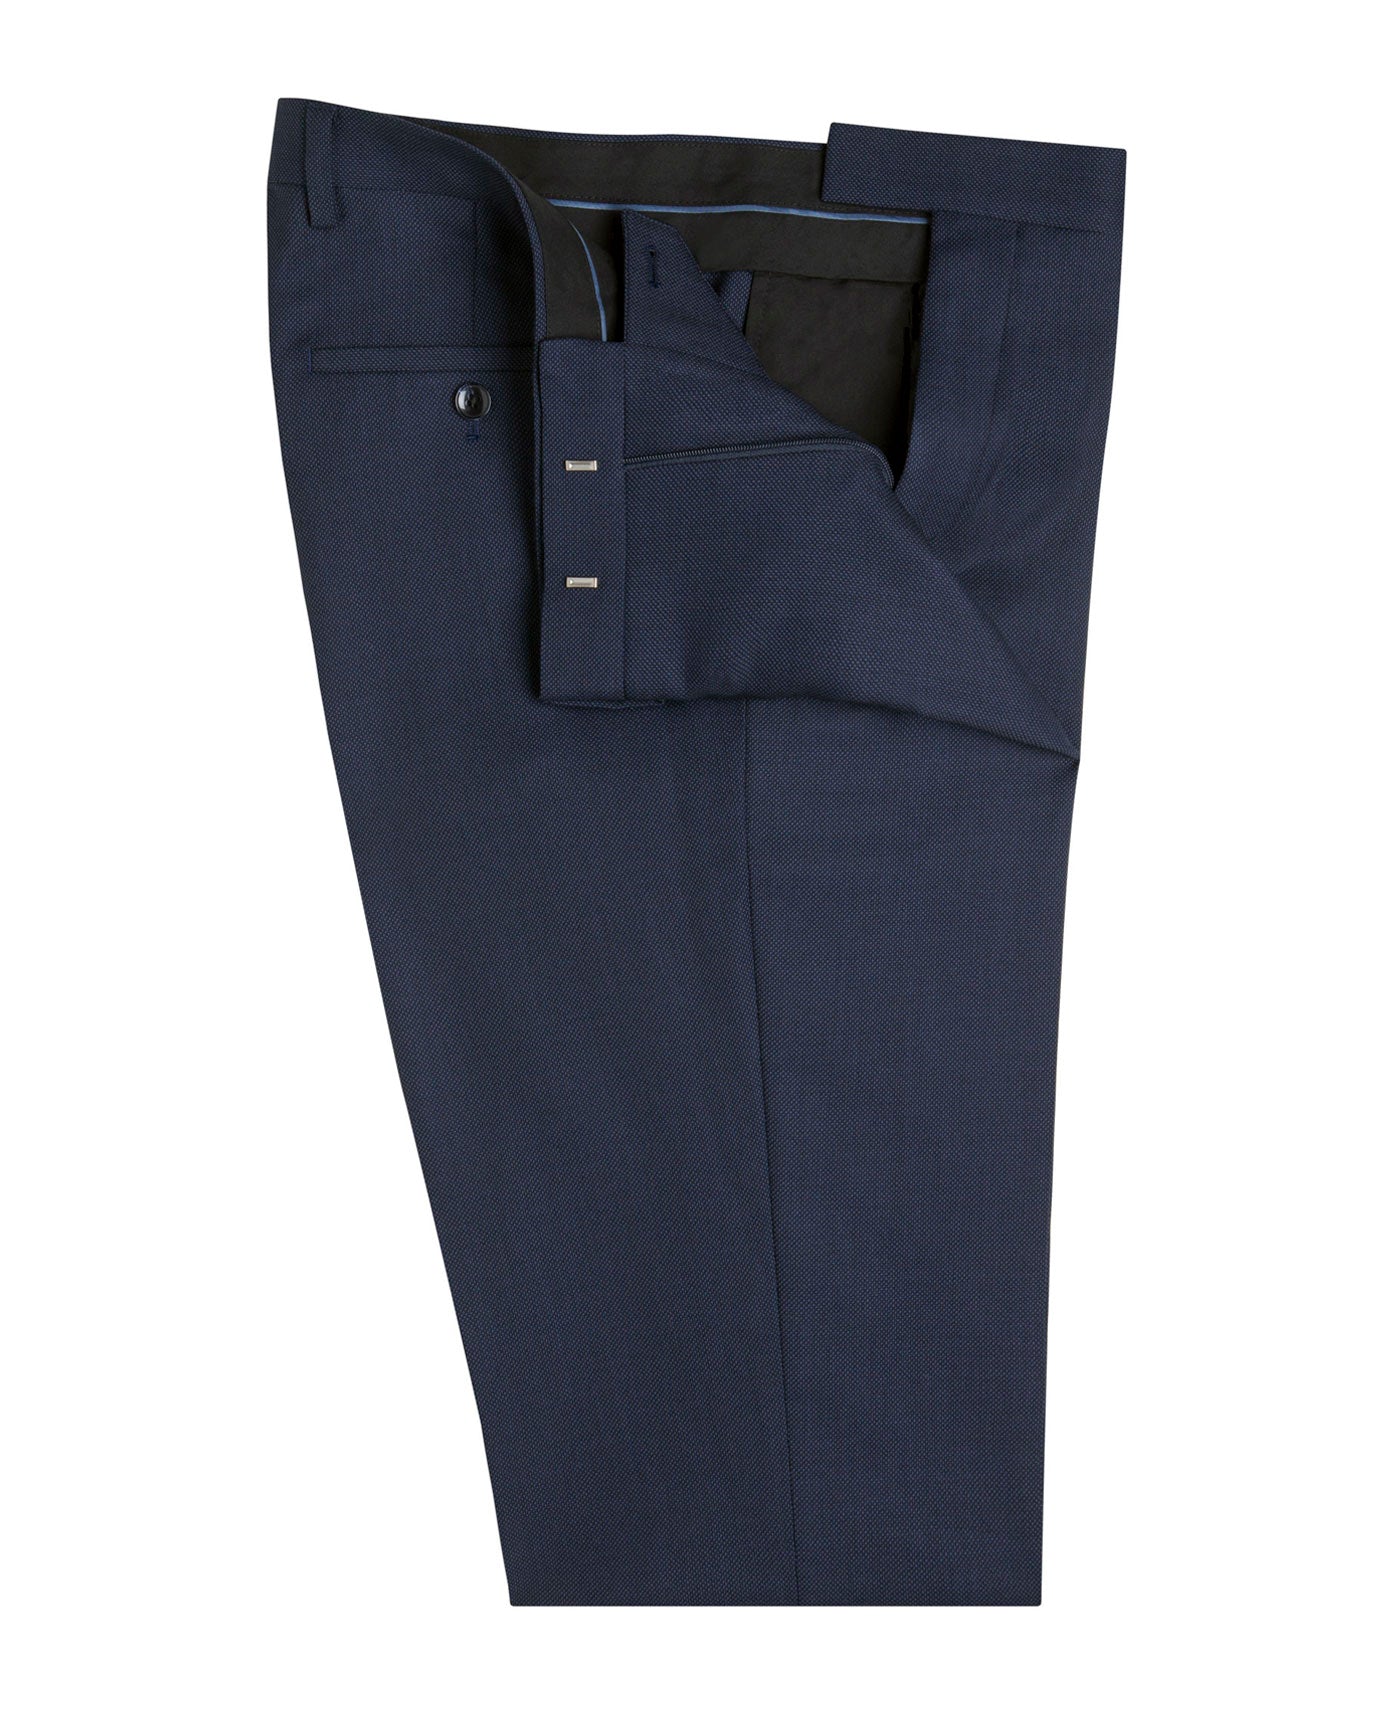 Image 2 of Brompton Flat Front Trousers Navy Blue